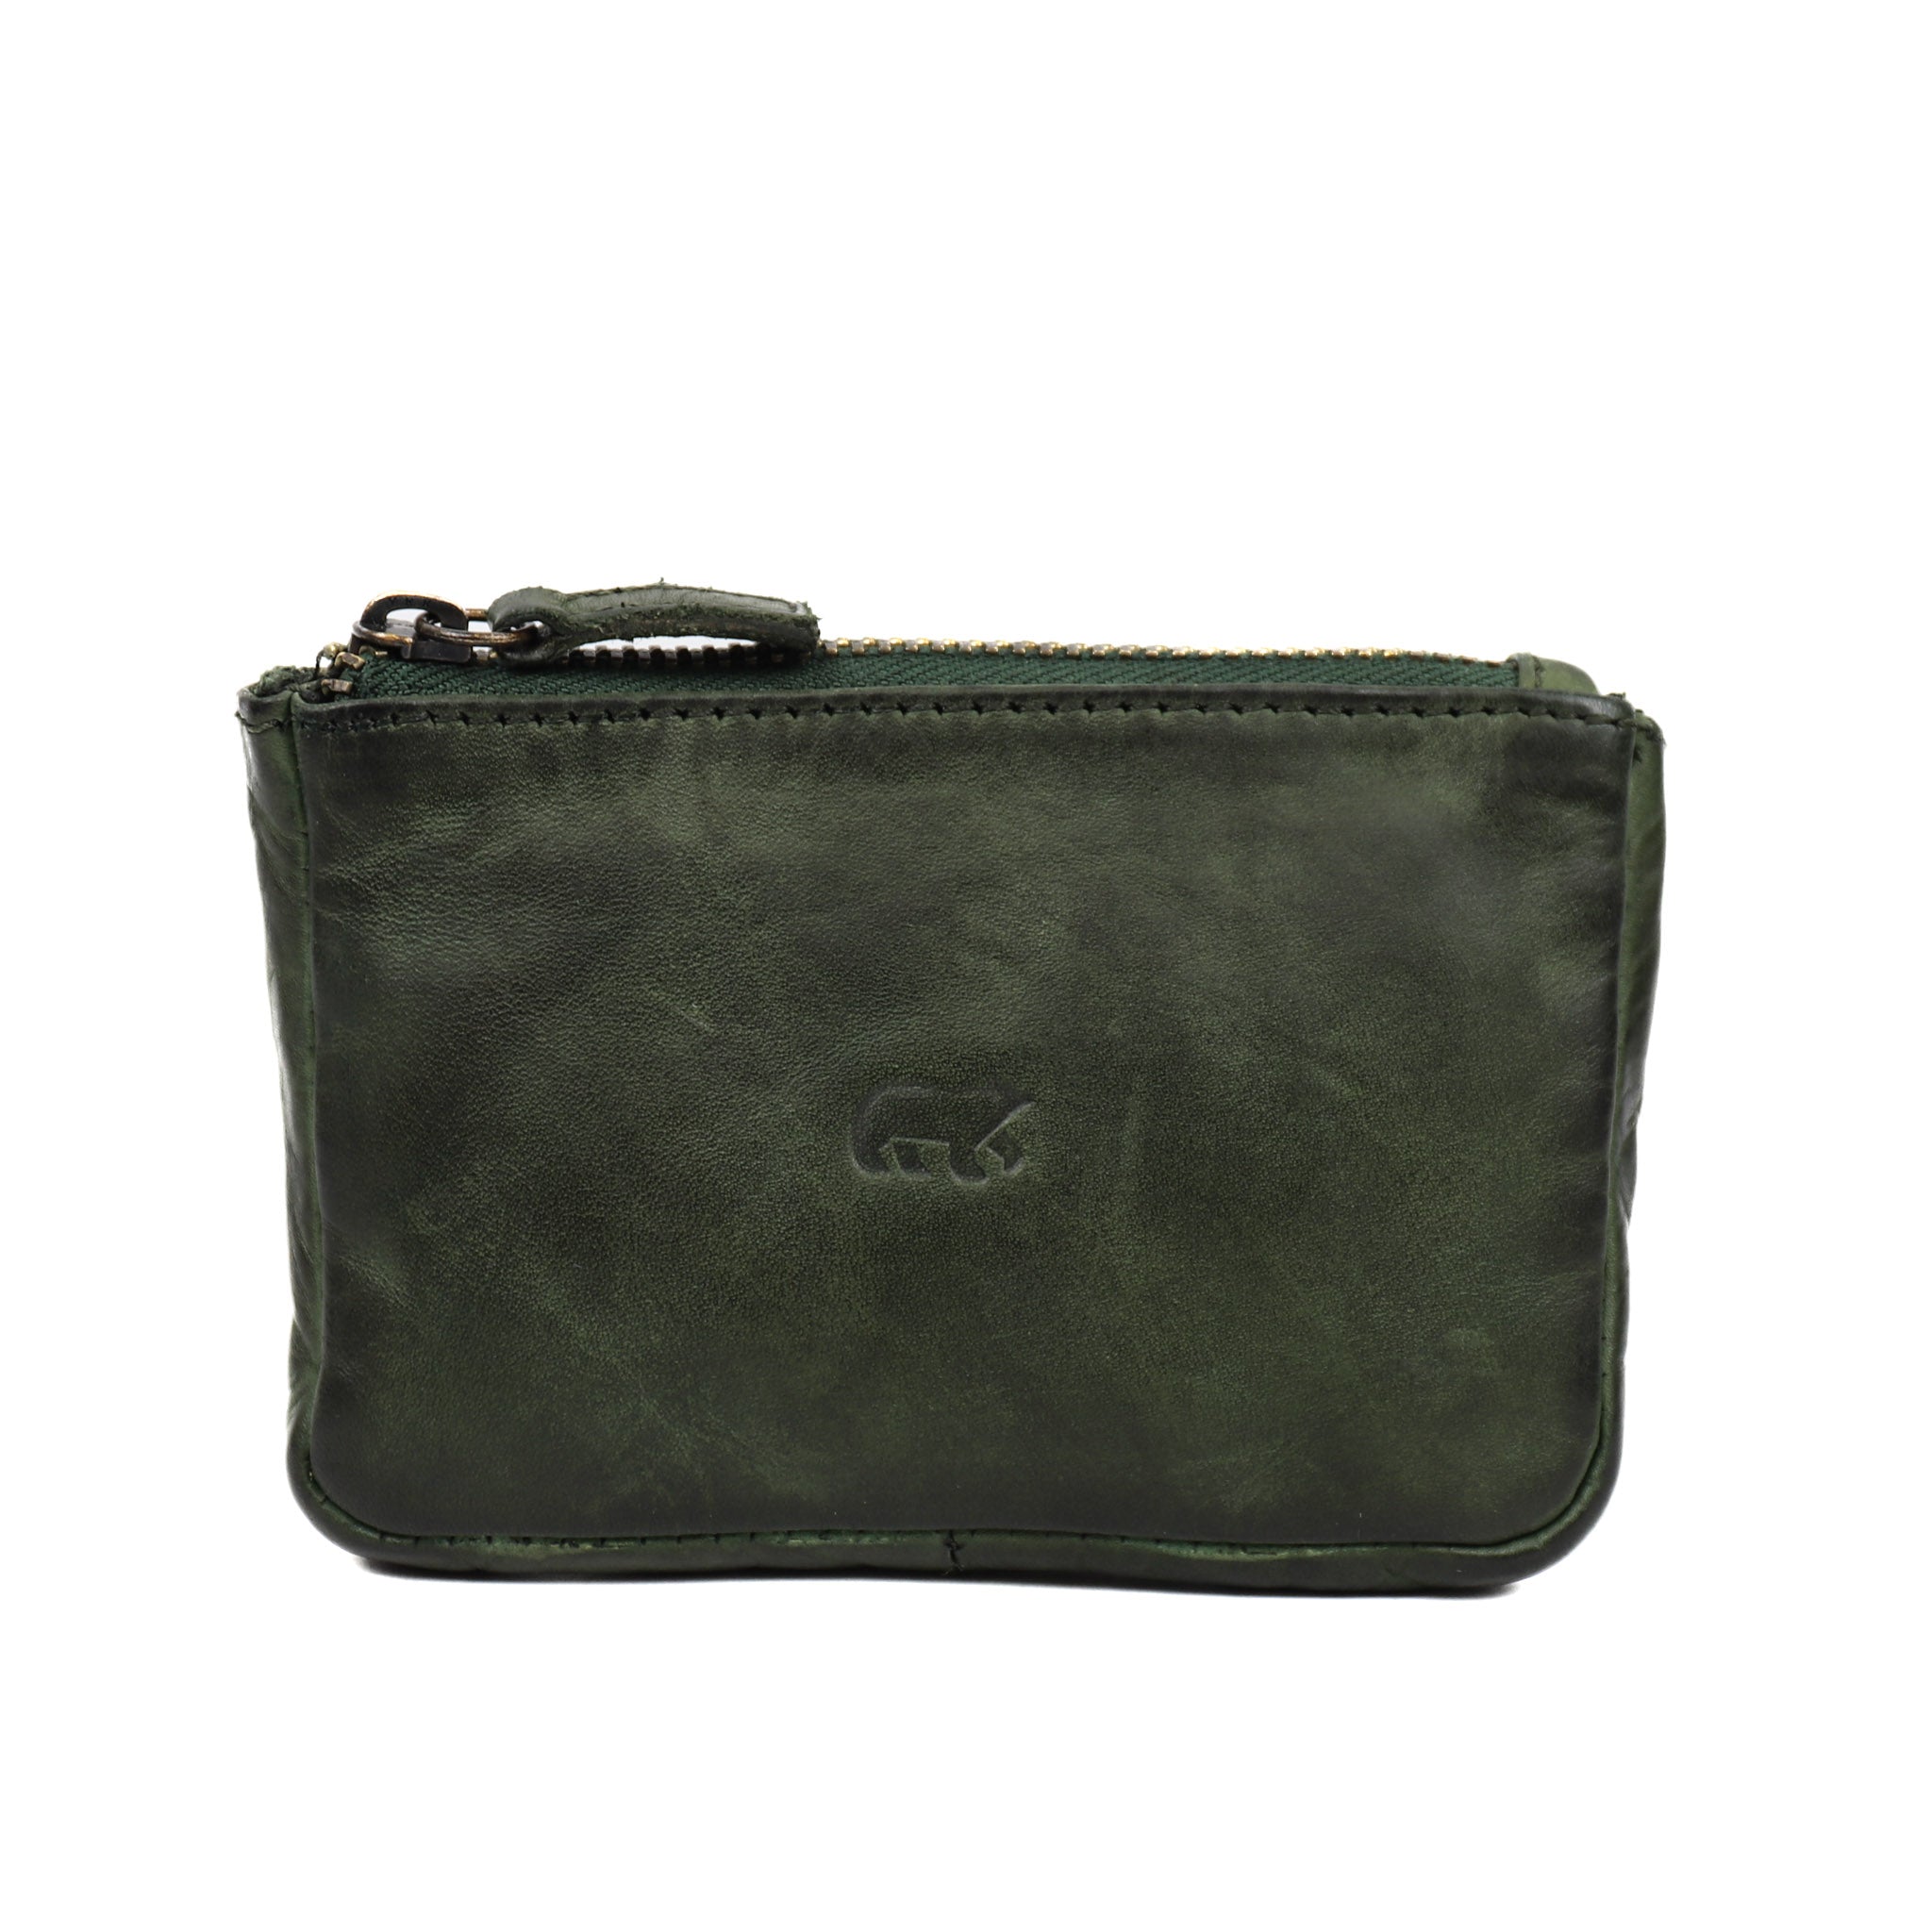 Key pouch 'Timo' green